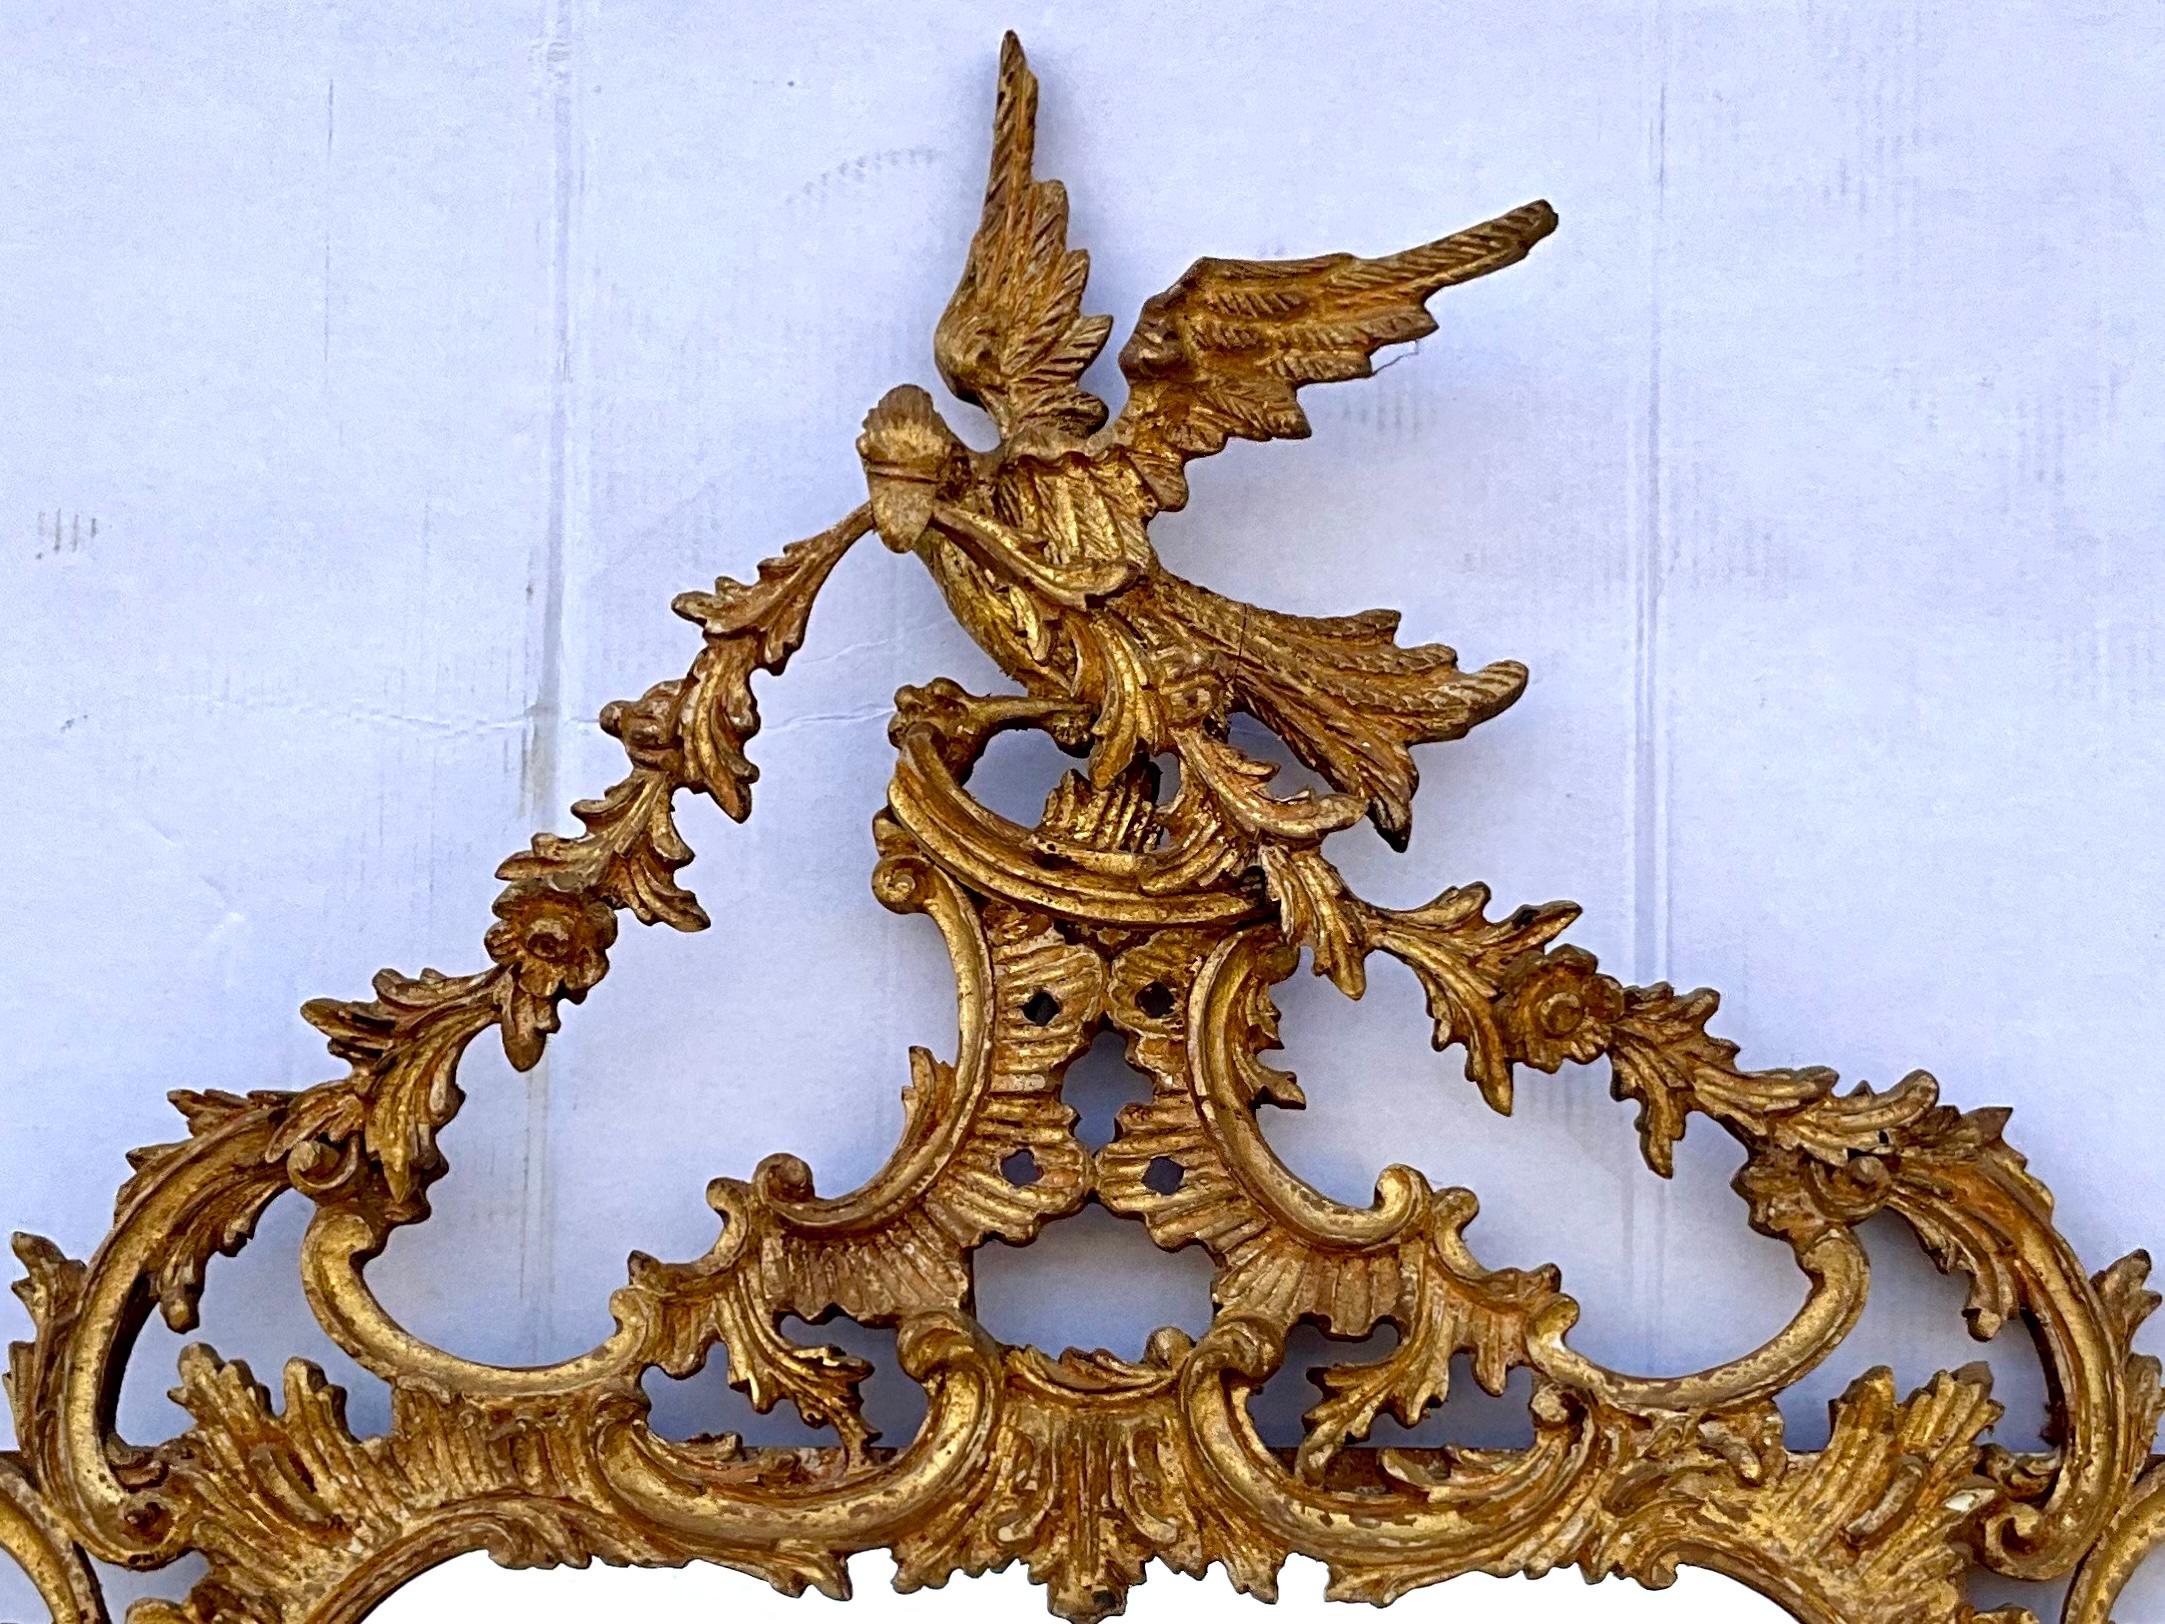 Timeless elegance! This is an Italian carved giltwood Chinese Chippendale style mirror in very good condition. It has an Italian label and may be by Friedman Brothers.